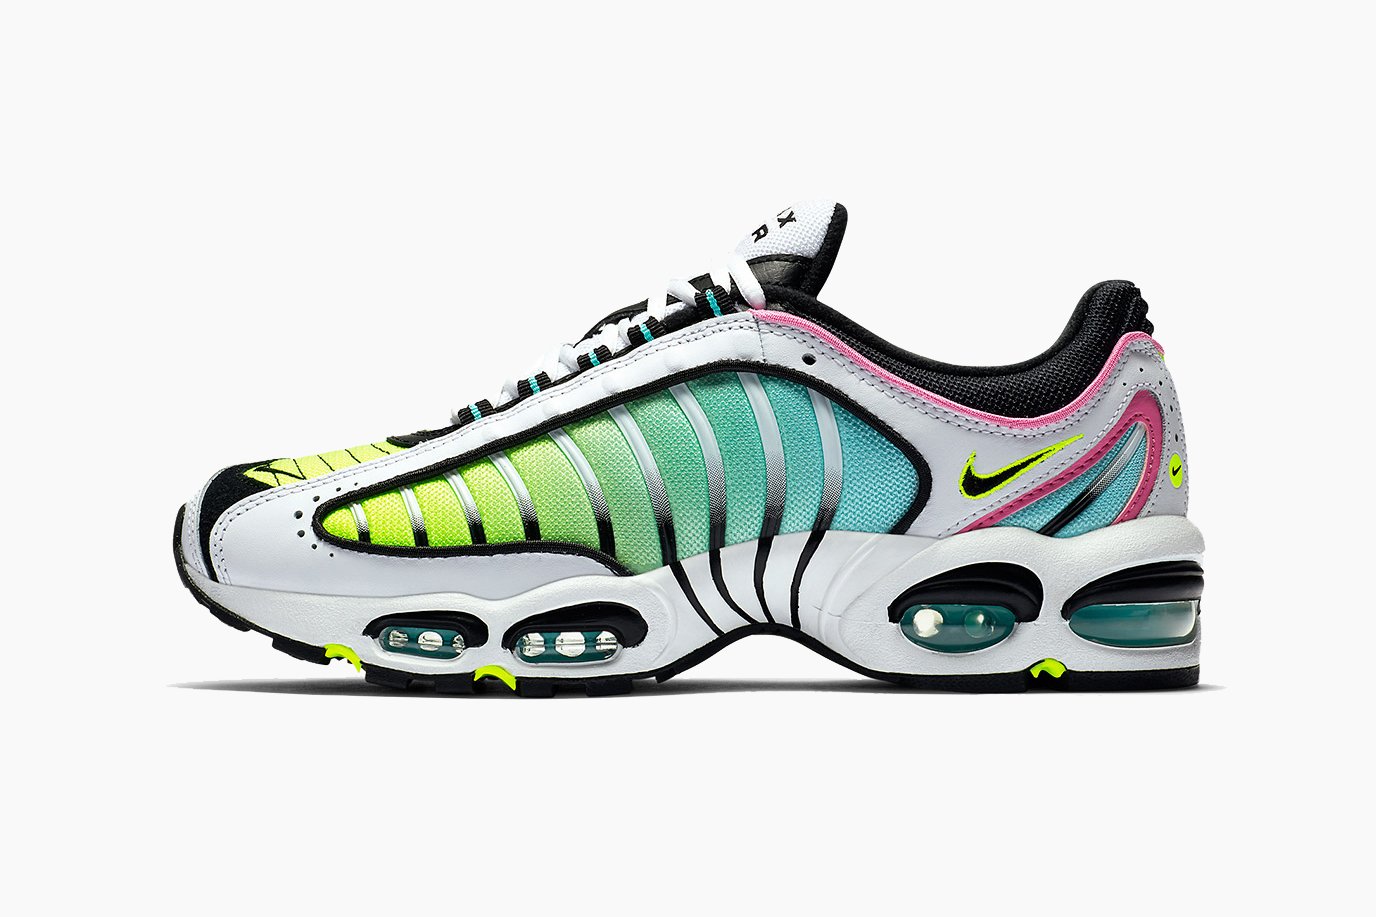 Nike Air Max Tailwind 4 China Rose Release Hypebeast Drops